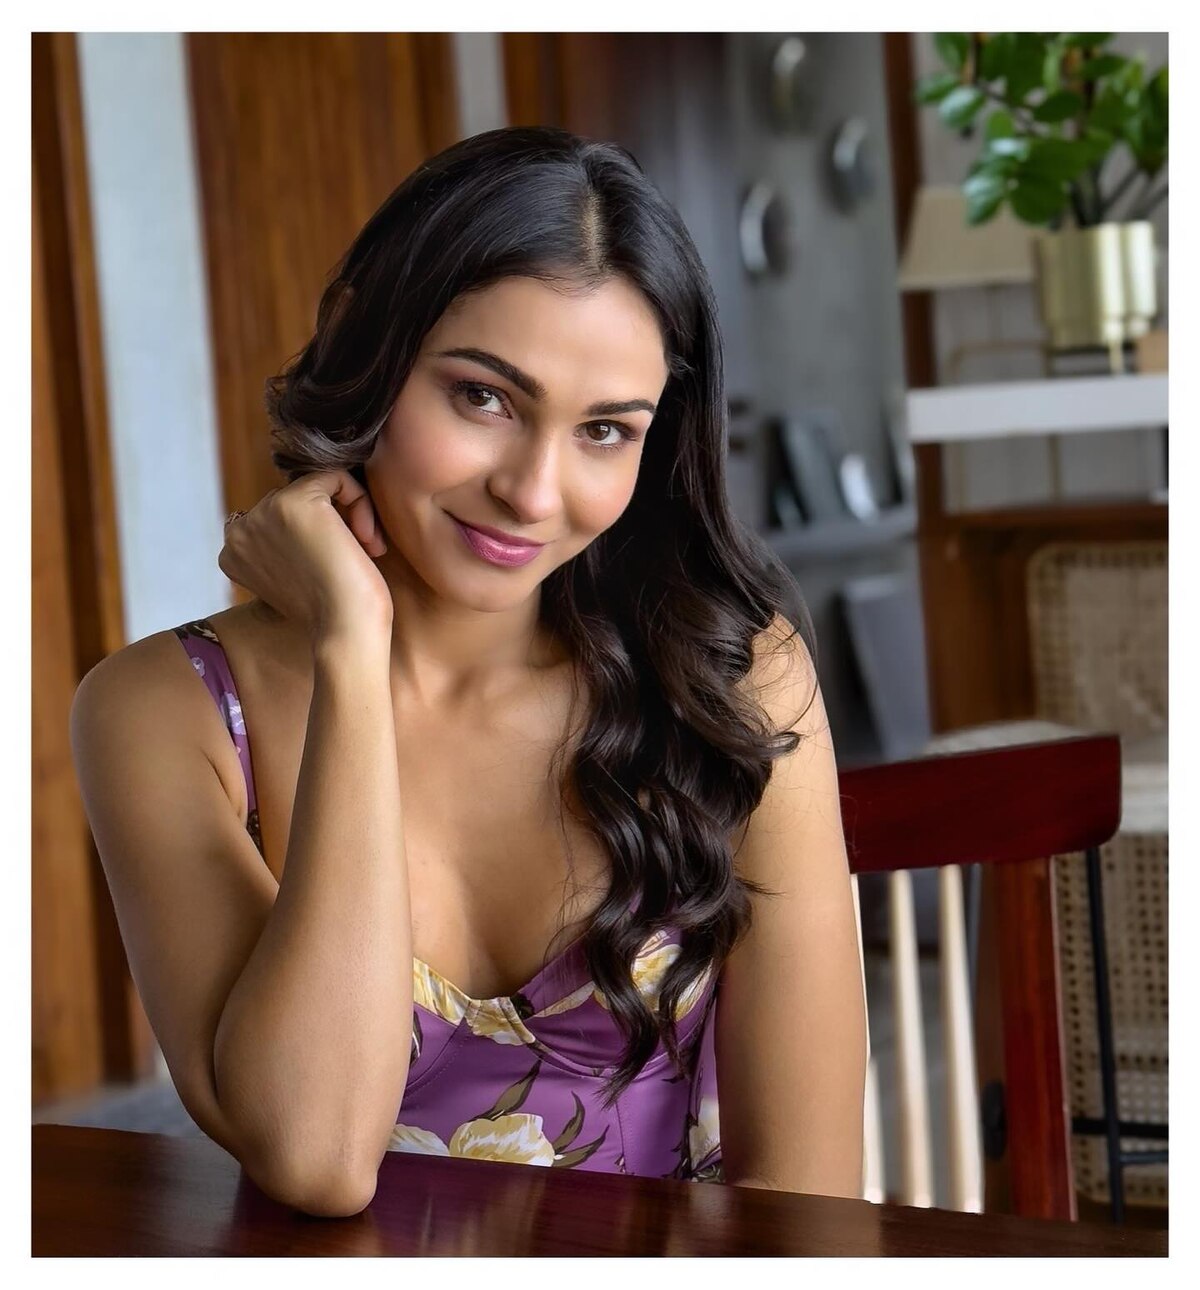 Andrea jeremiah in jewelry shop promotion